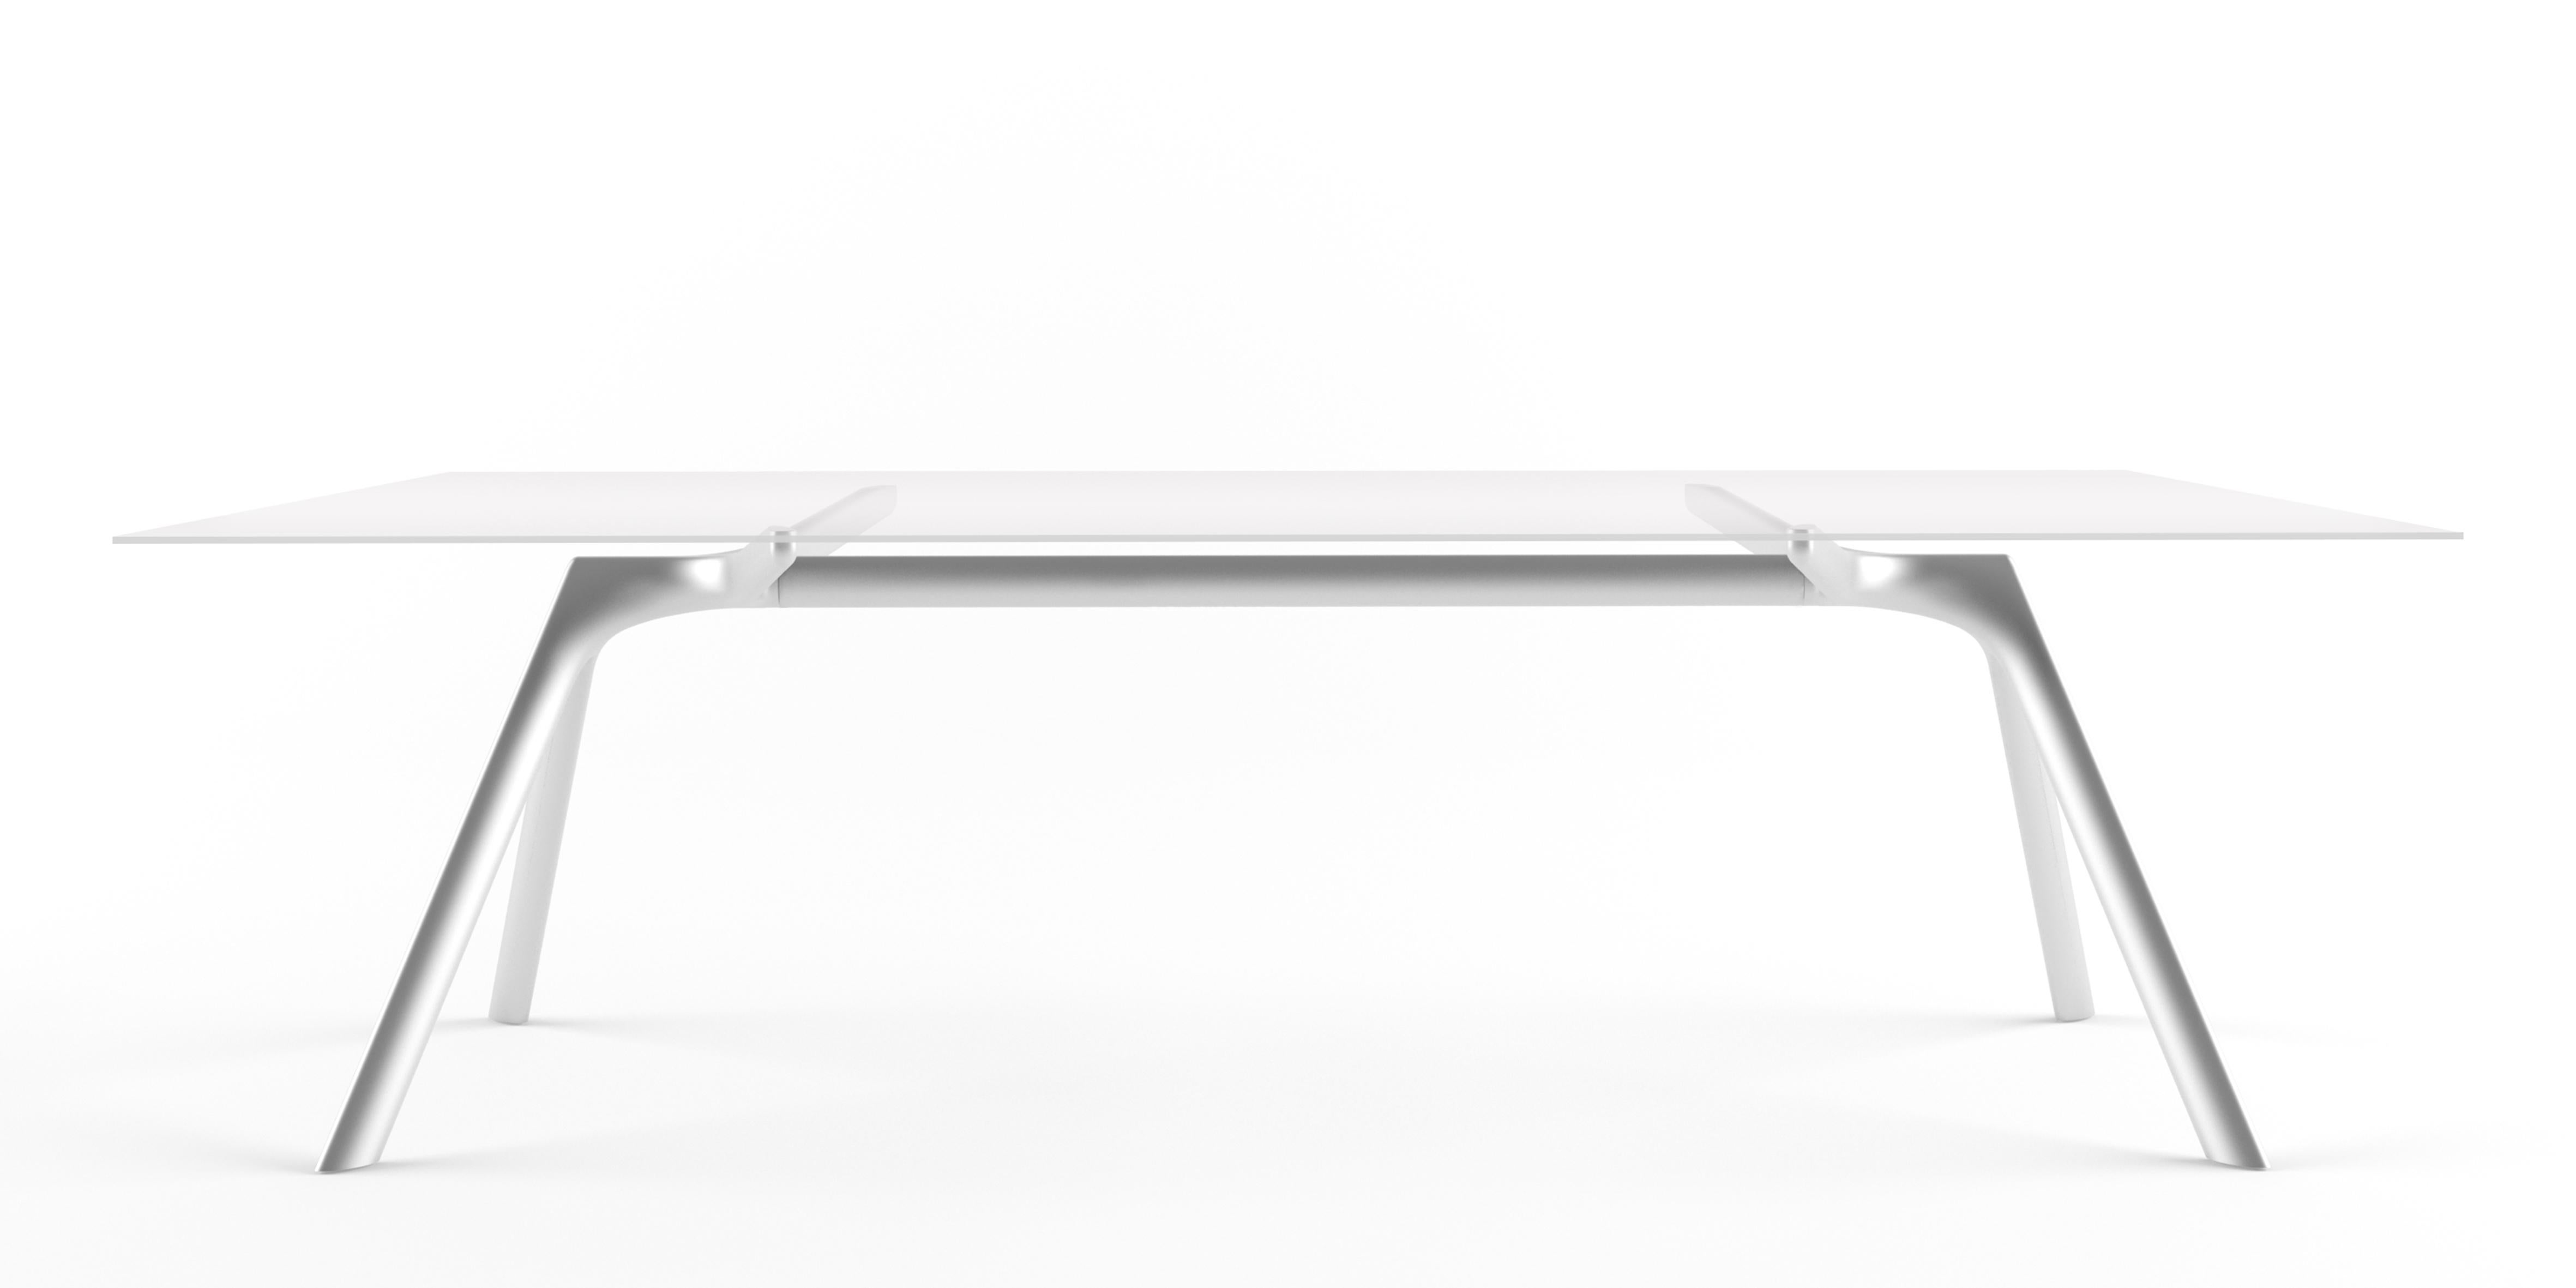 Alias Large Dry 45A Table in Glass Top with Anodised Silver Metallic Lacquered Aluminium Frame by Alberto Meda

Table with structure made of lacquered aluminium elements. Top in extra light tempered glass, thickness 10 mm. Available with